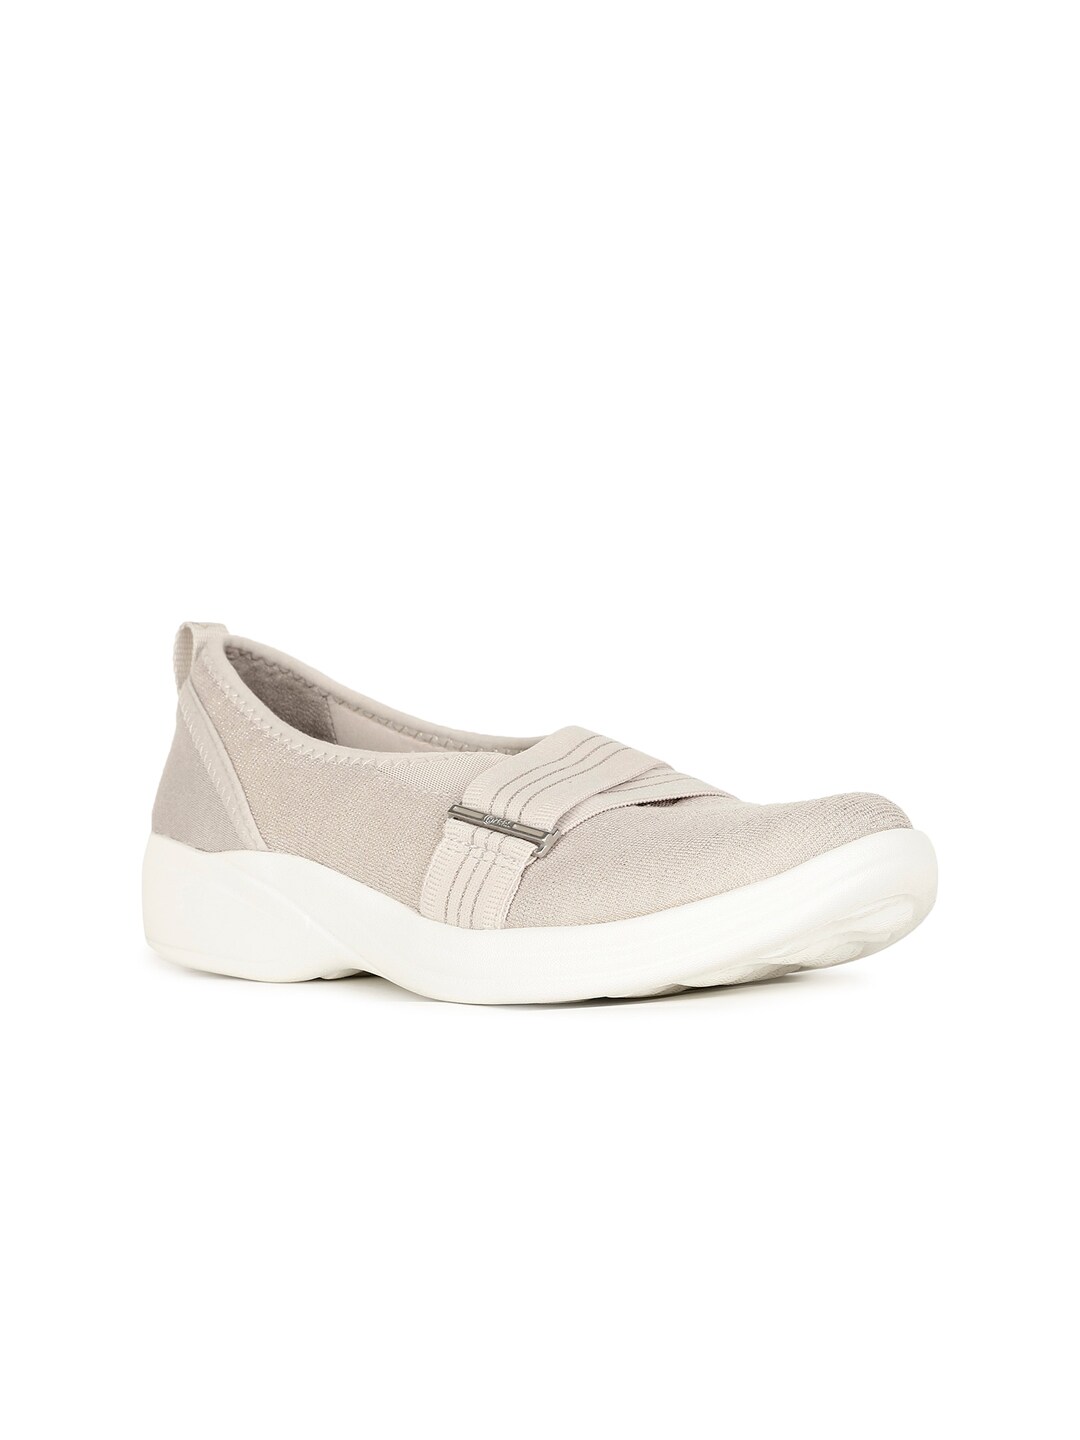 Naturalizer Women Round Toe Slip-On Sneakers Price in India